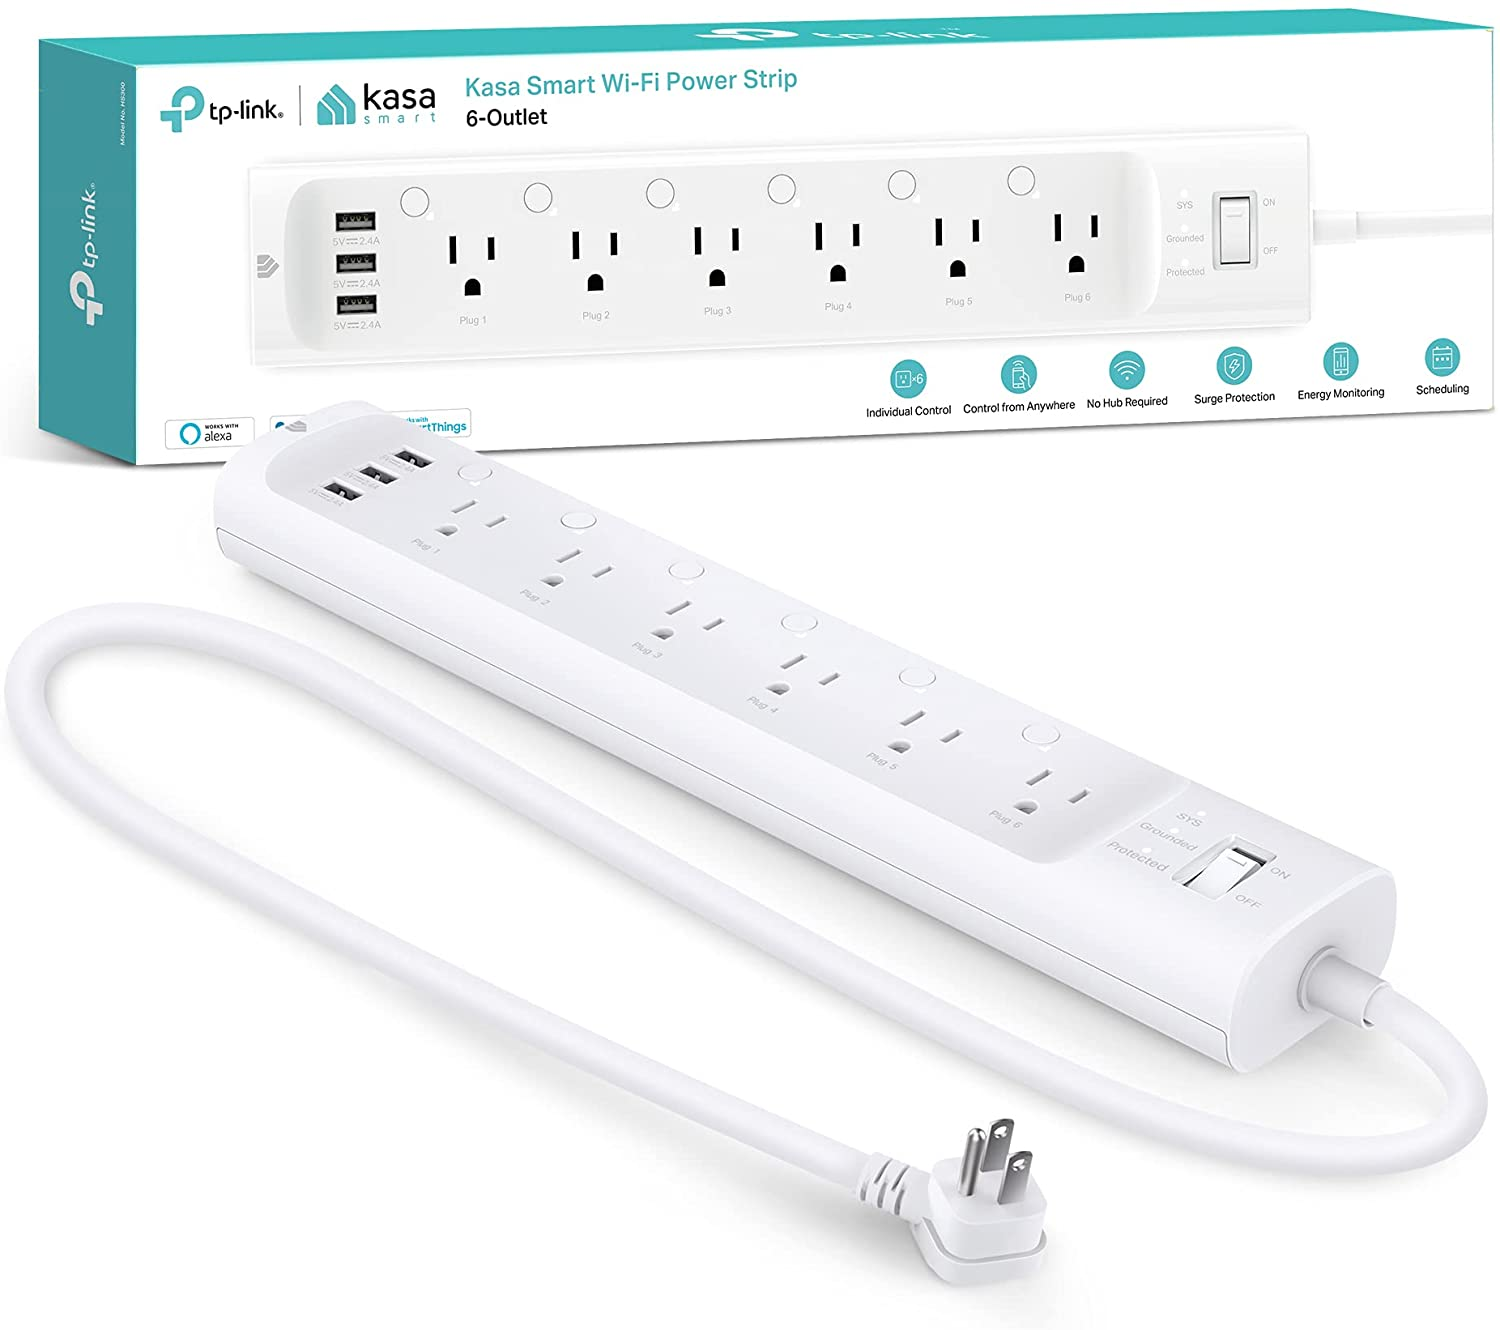 TP-Link's new Kasa KP400 Outdoor Dual Outlet Smart Plug falls to